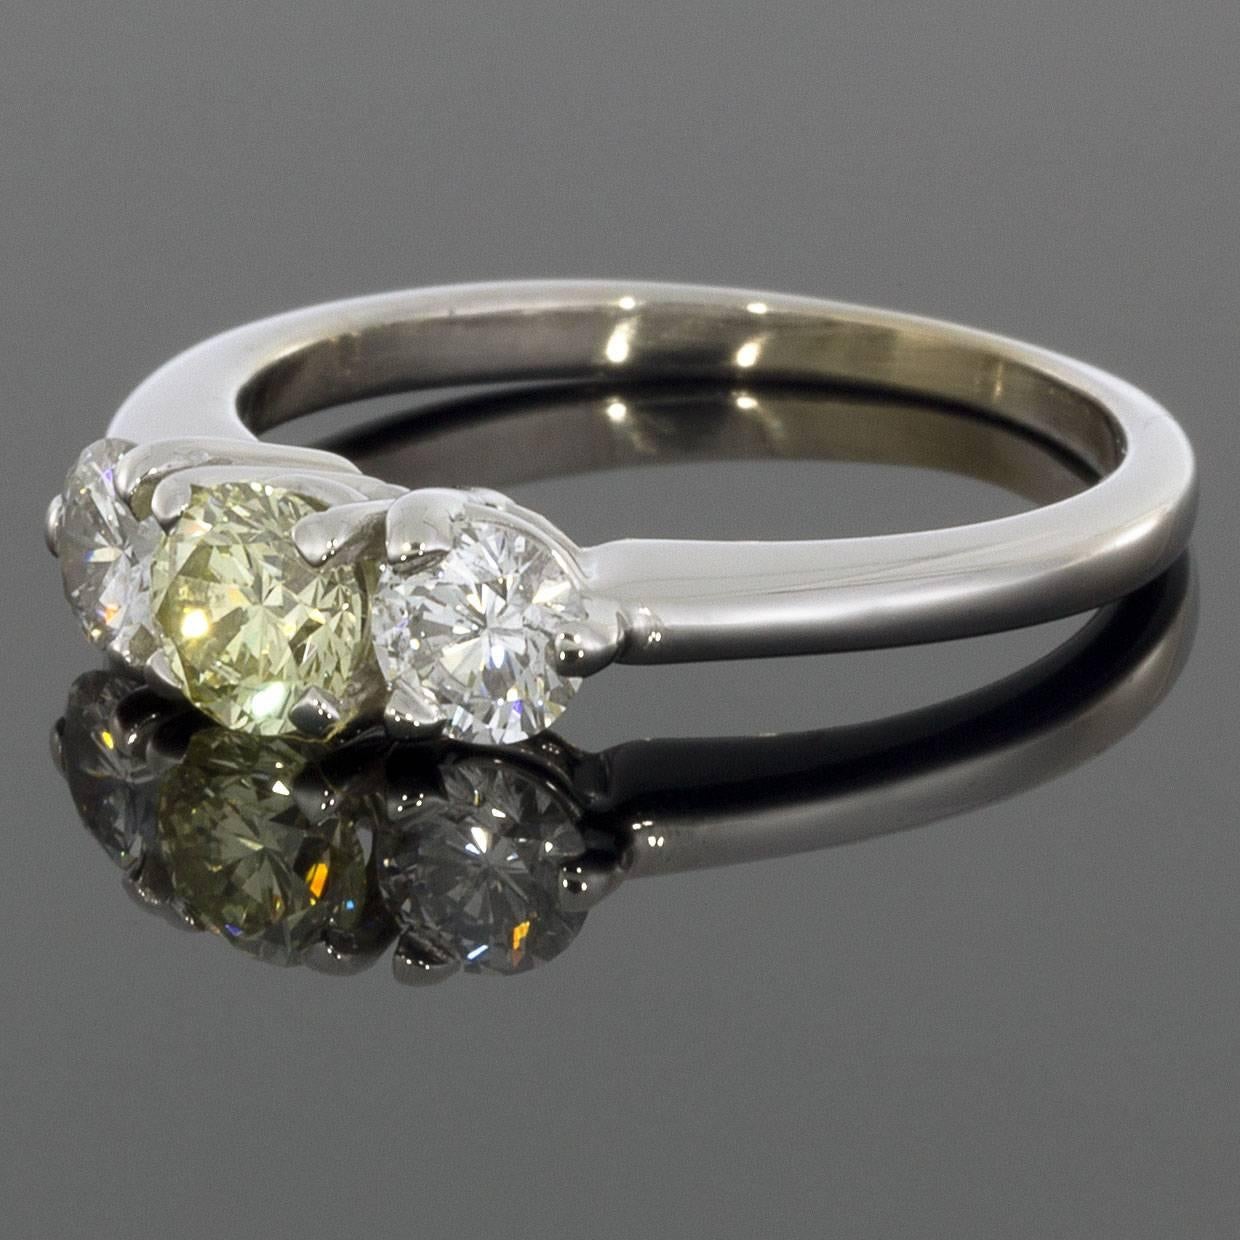 This gorgeous three-stone engagement ring features a stunning fancy light yellow round diamond. The center diamond is flanked by two white round diamonds. The diamonds grade as VS2 in clarity. The total carat weight of this ring is 1.0 carats. The